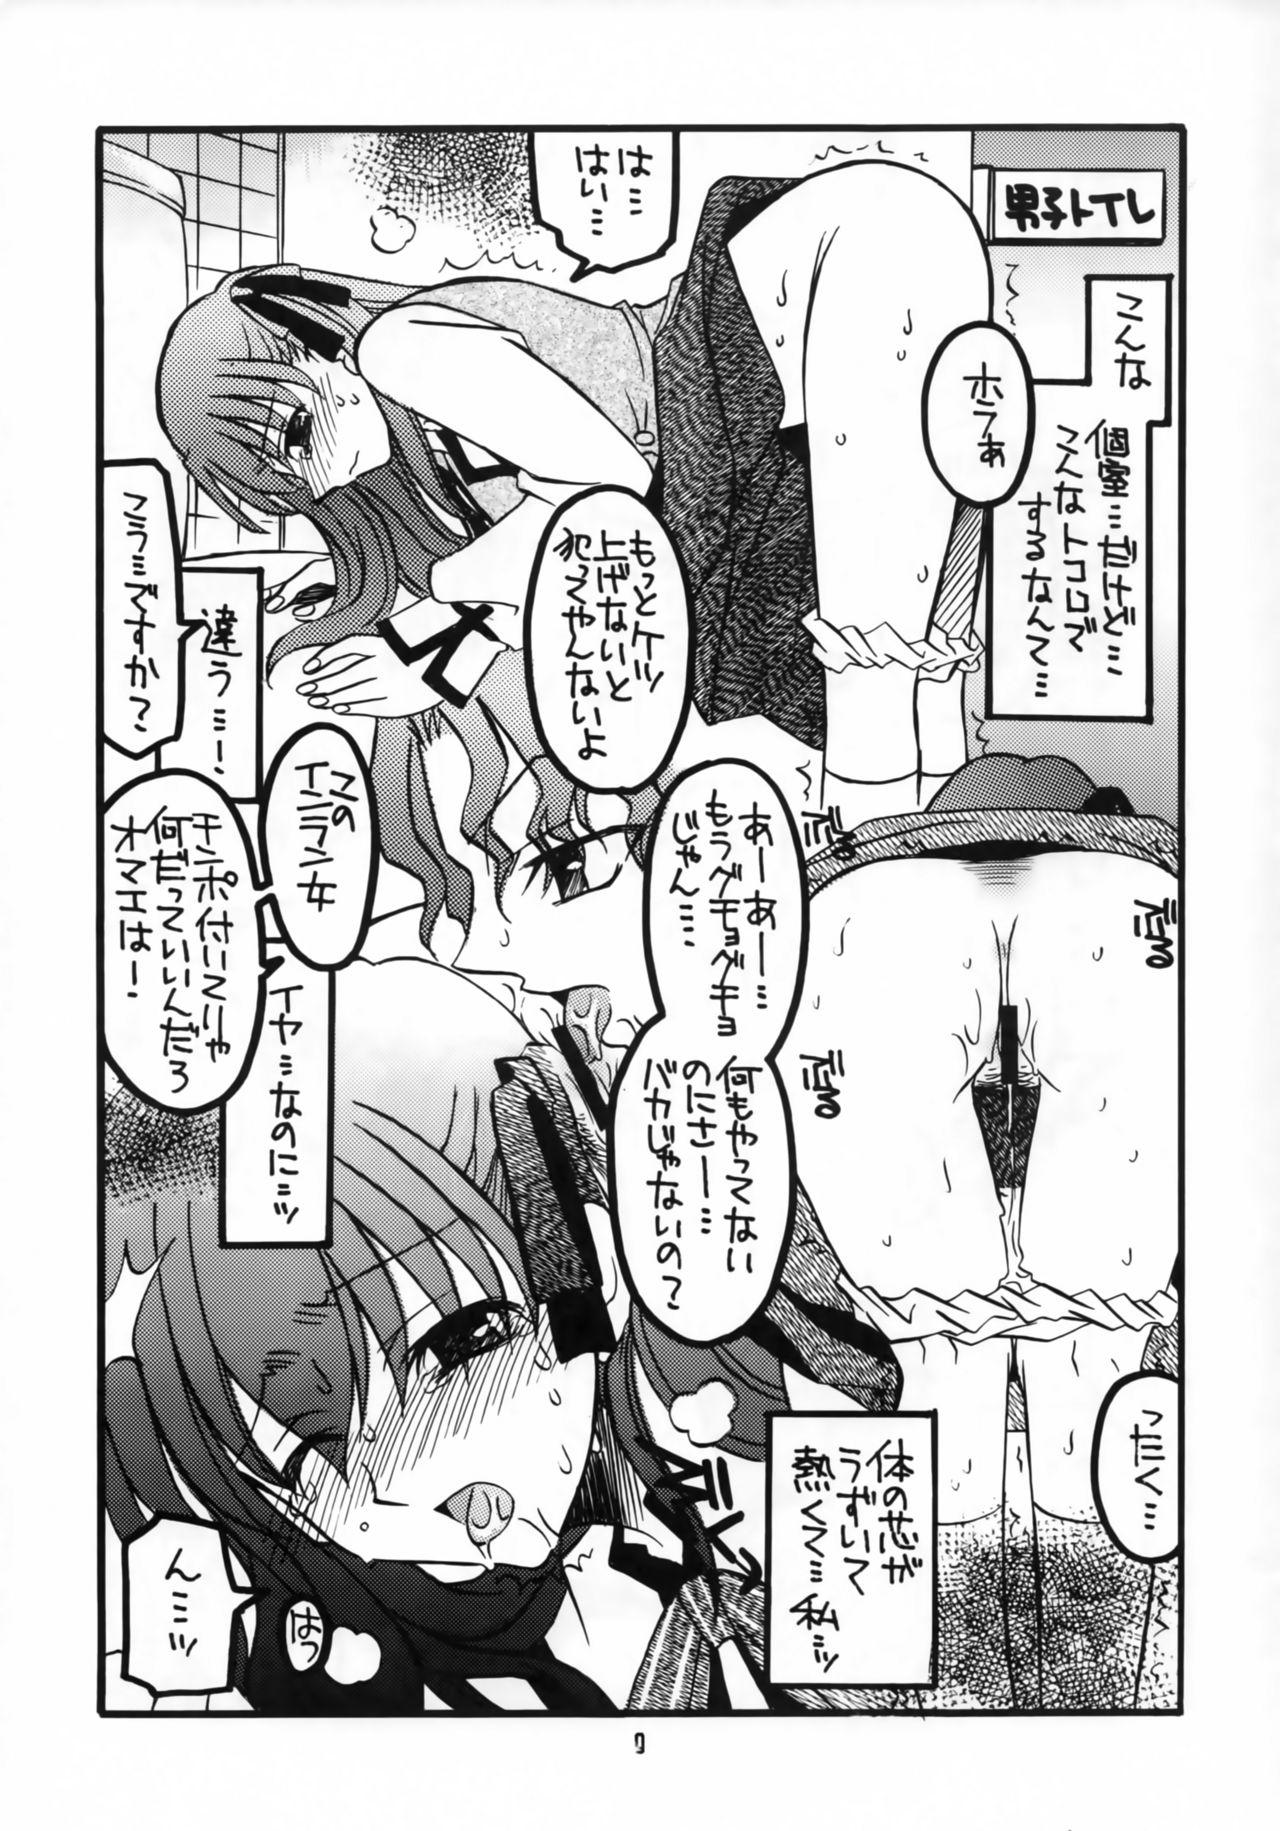 Horny (C66) [Squall (Takano Ukou)] Sakura-chan to Rider-san Chotto Erogimi Hon (Fate/stay night) - Fate stay night All Natural - Page 8